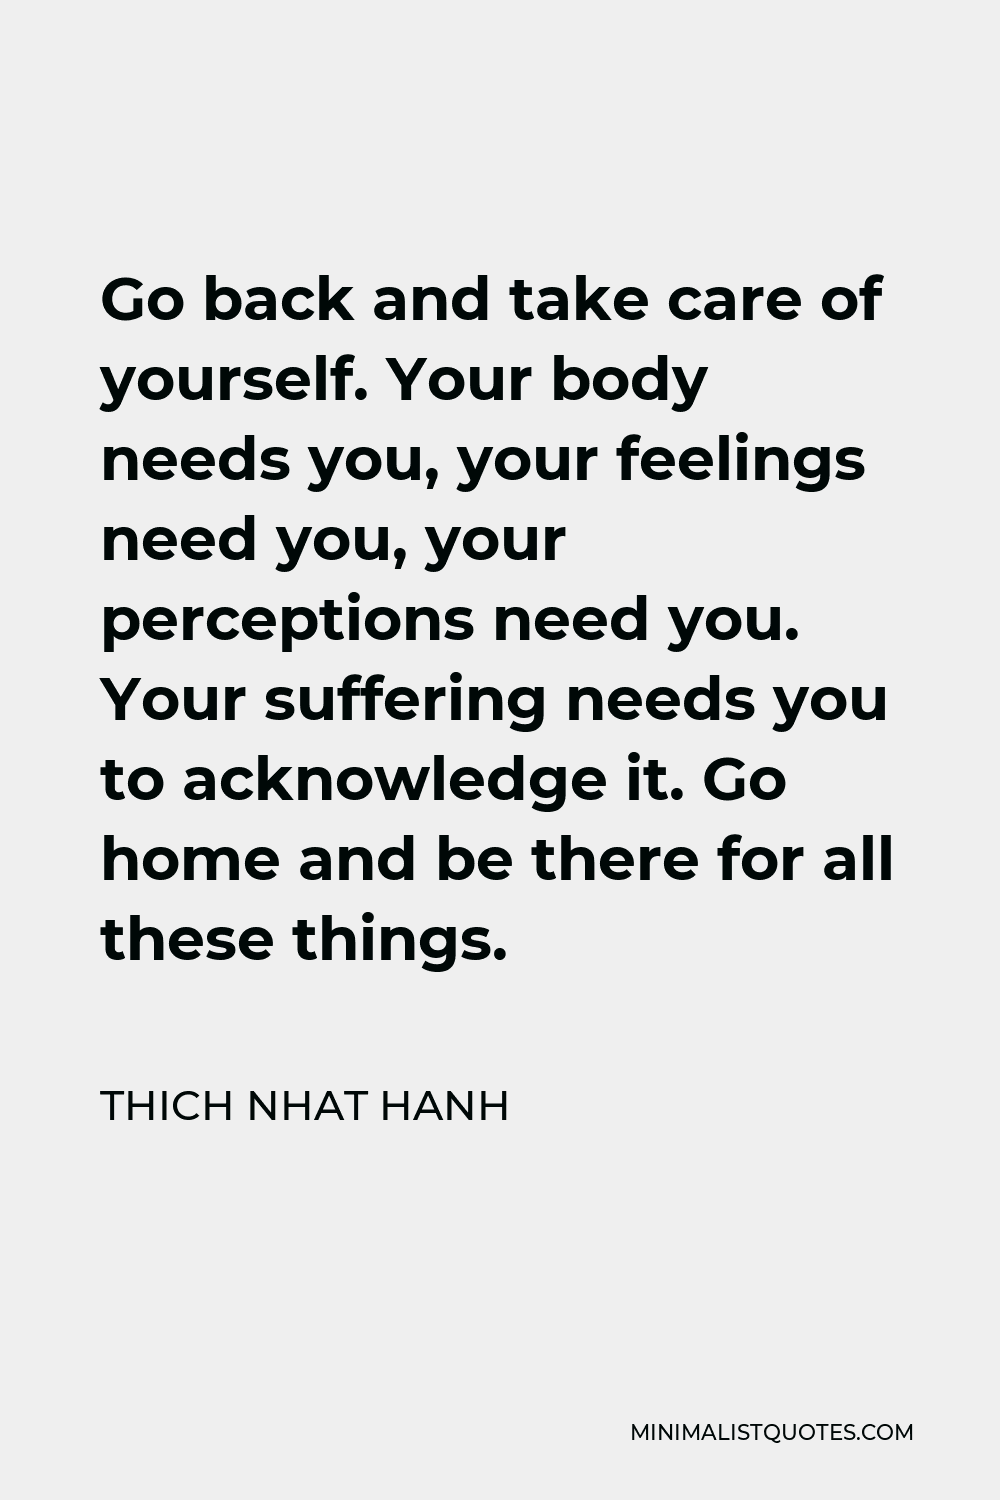 Thich Nhat Hanh Quote - Go back and take care of yourself. Your body needs you, your feelings need you, your perceptions need you. Your suffering needs you to acknowledge it. Go home and be there for all these things.